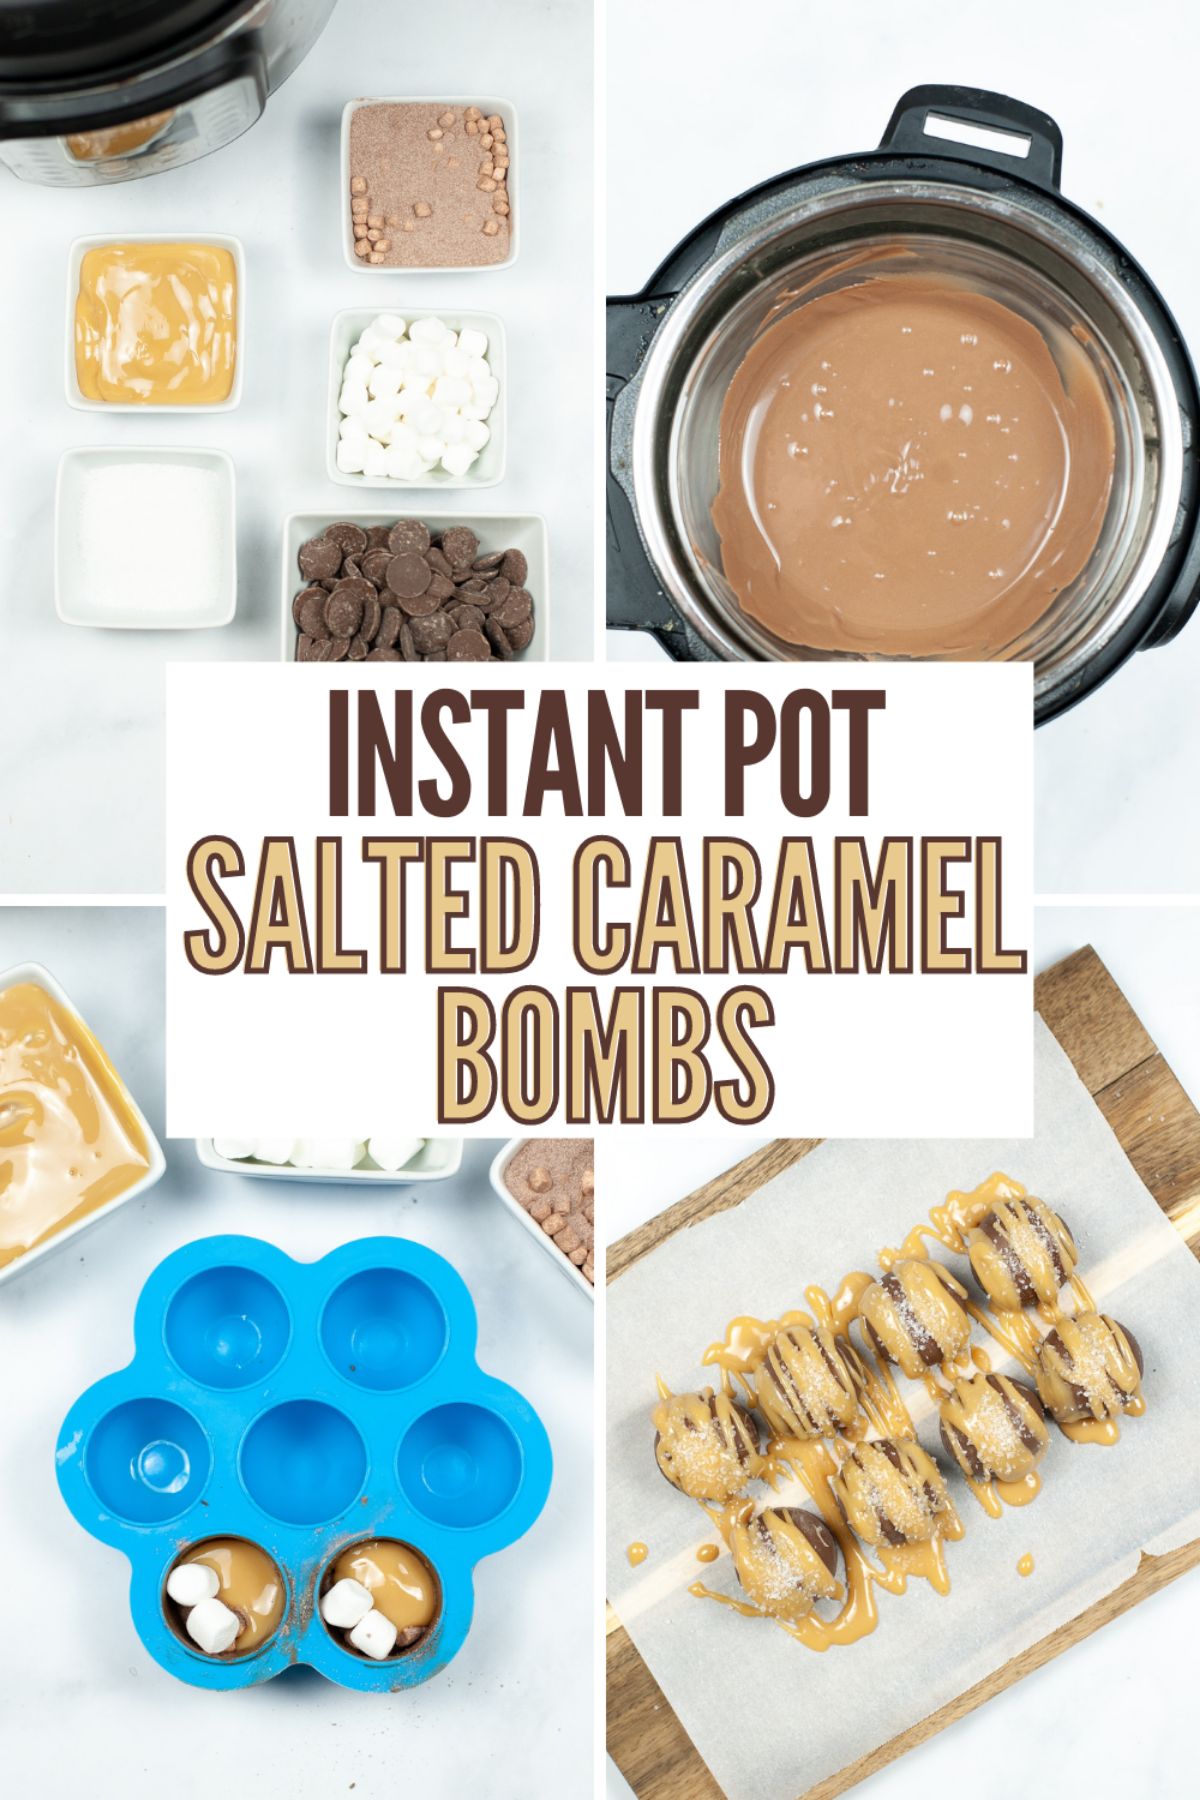 Instant Pot Salted Caramel Hot Cocoa Bombs are the perfect mixture of sweet and salty. They're a great budget-friendly homemade gift. #instantpot #pressurecooker #hotcocoabombs #cocoabombs #saltedcaramel via @wondermomwannab